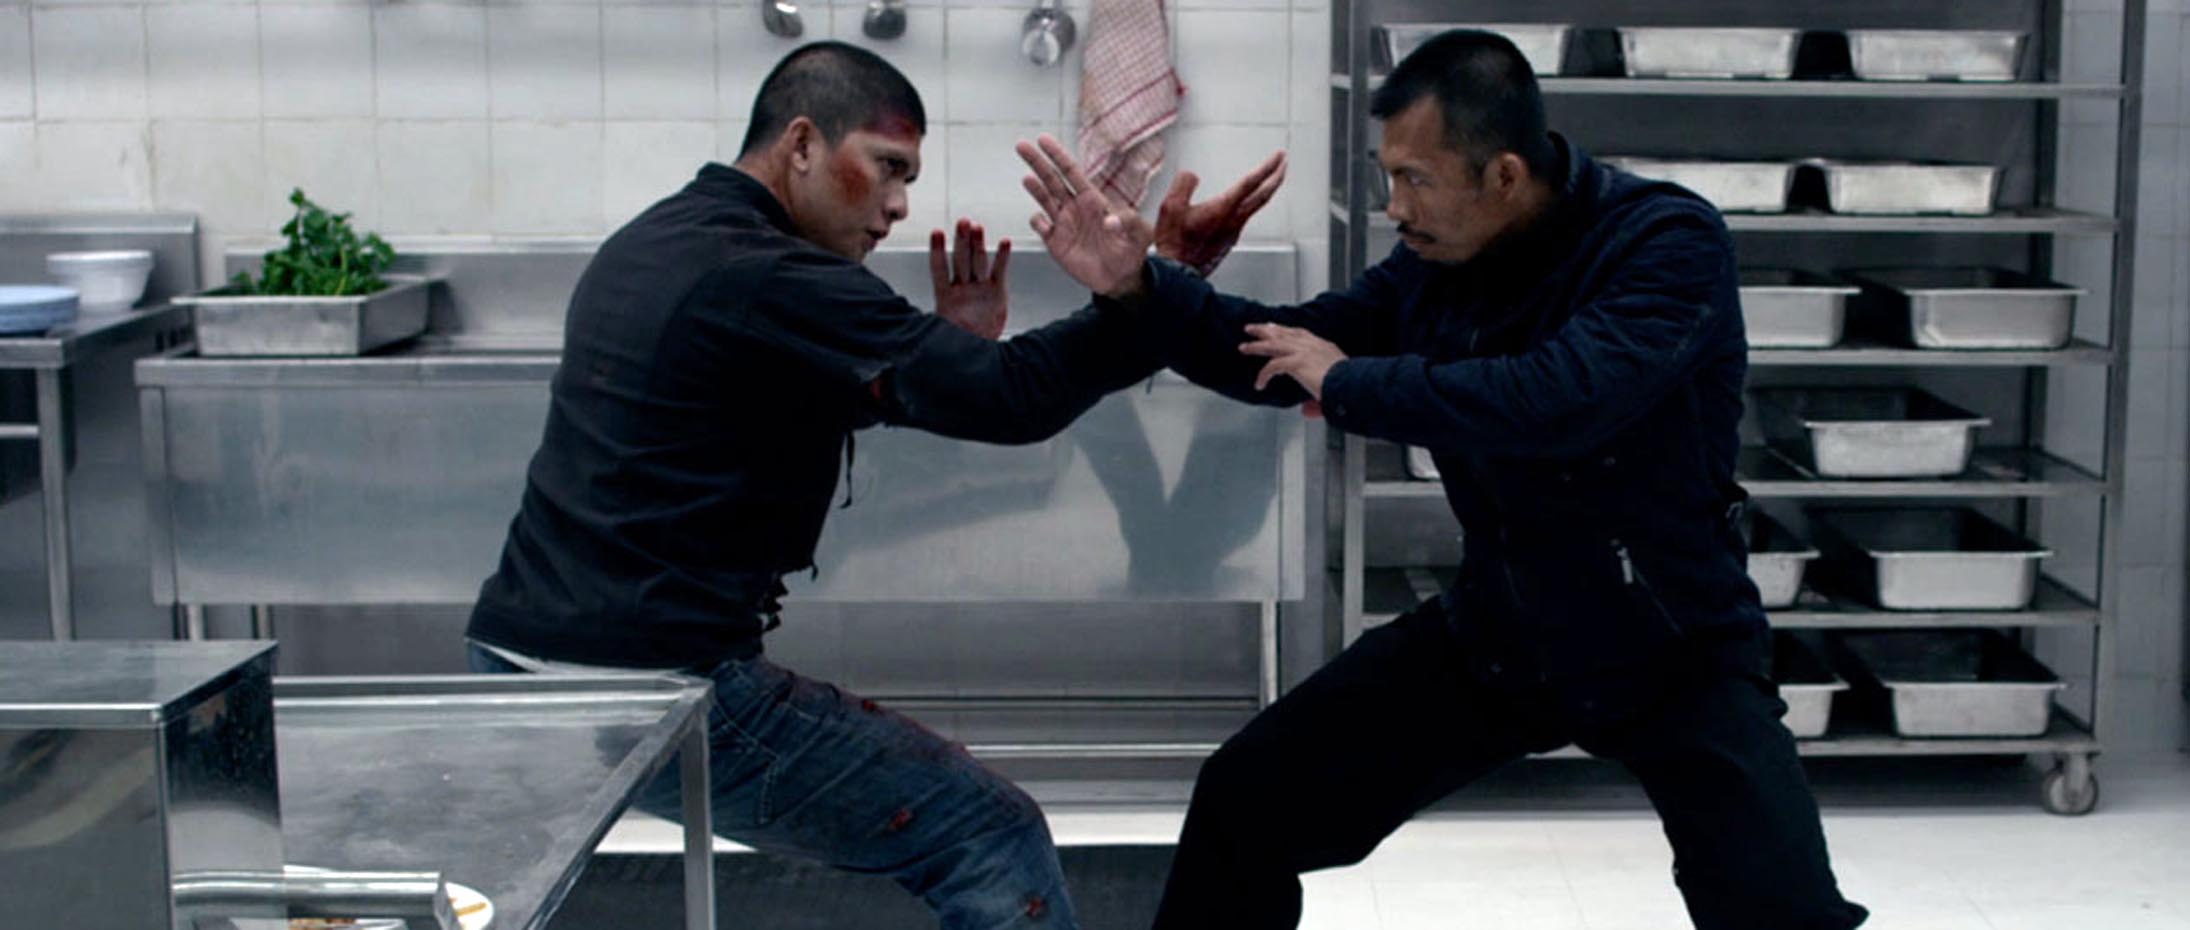 The Top 20 Fights Scenes Of All Time - Martial Arts Review